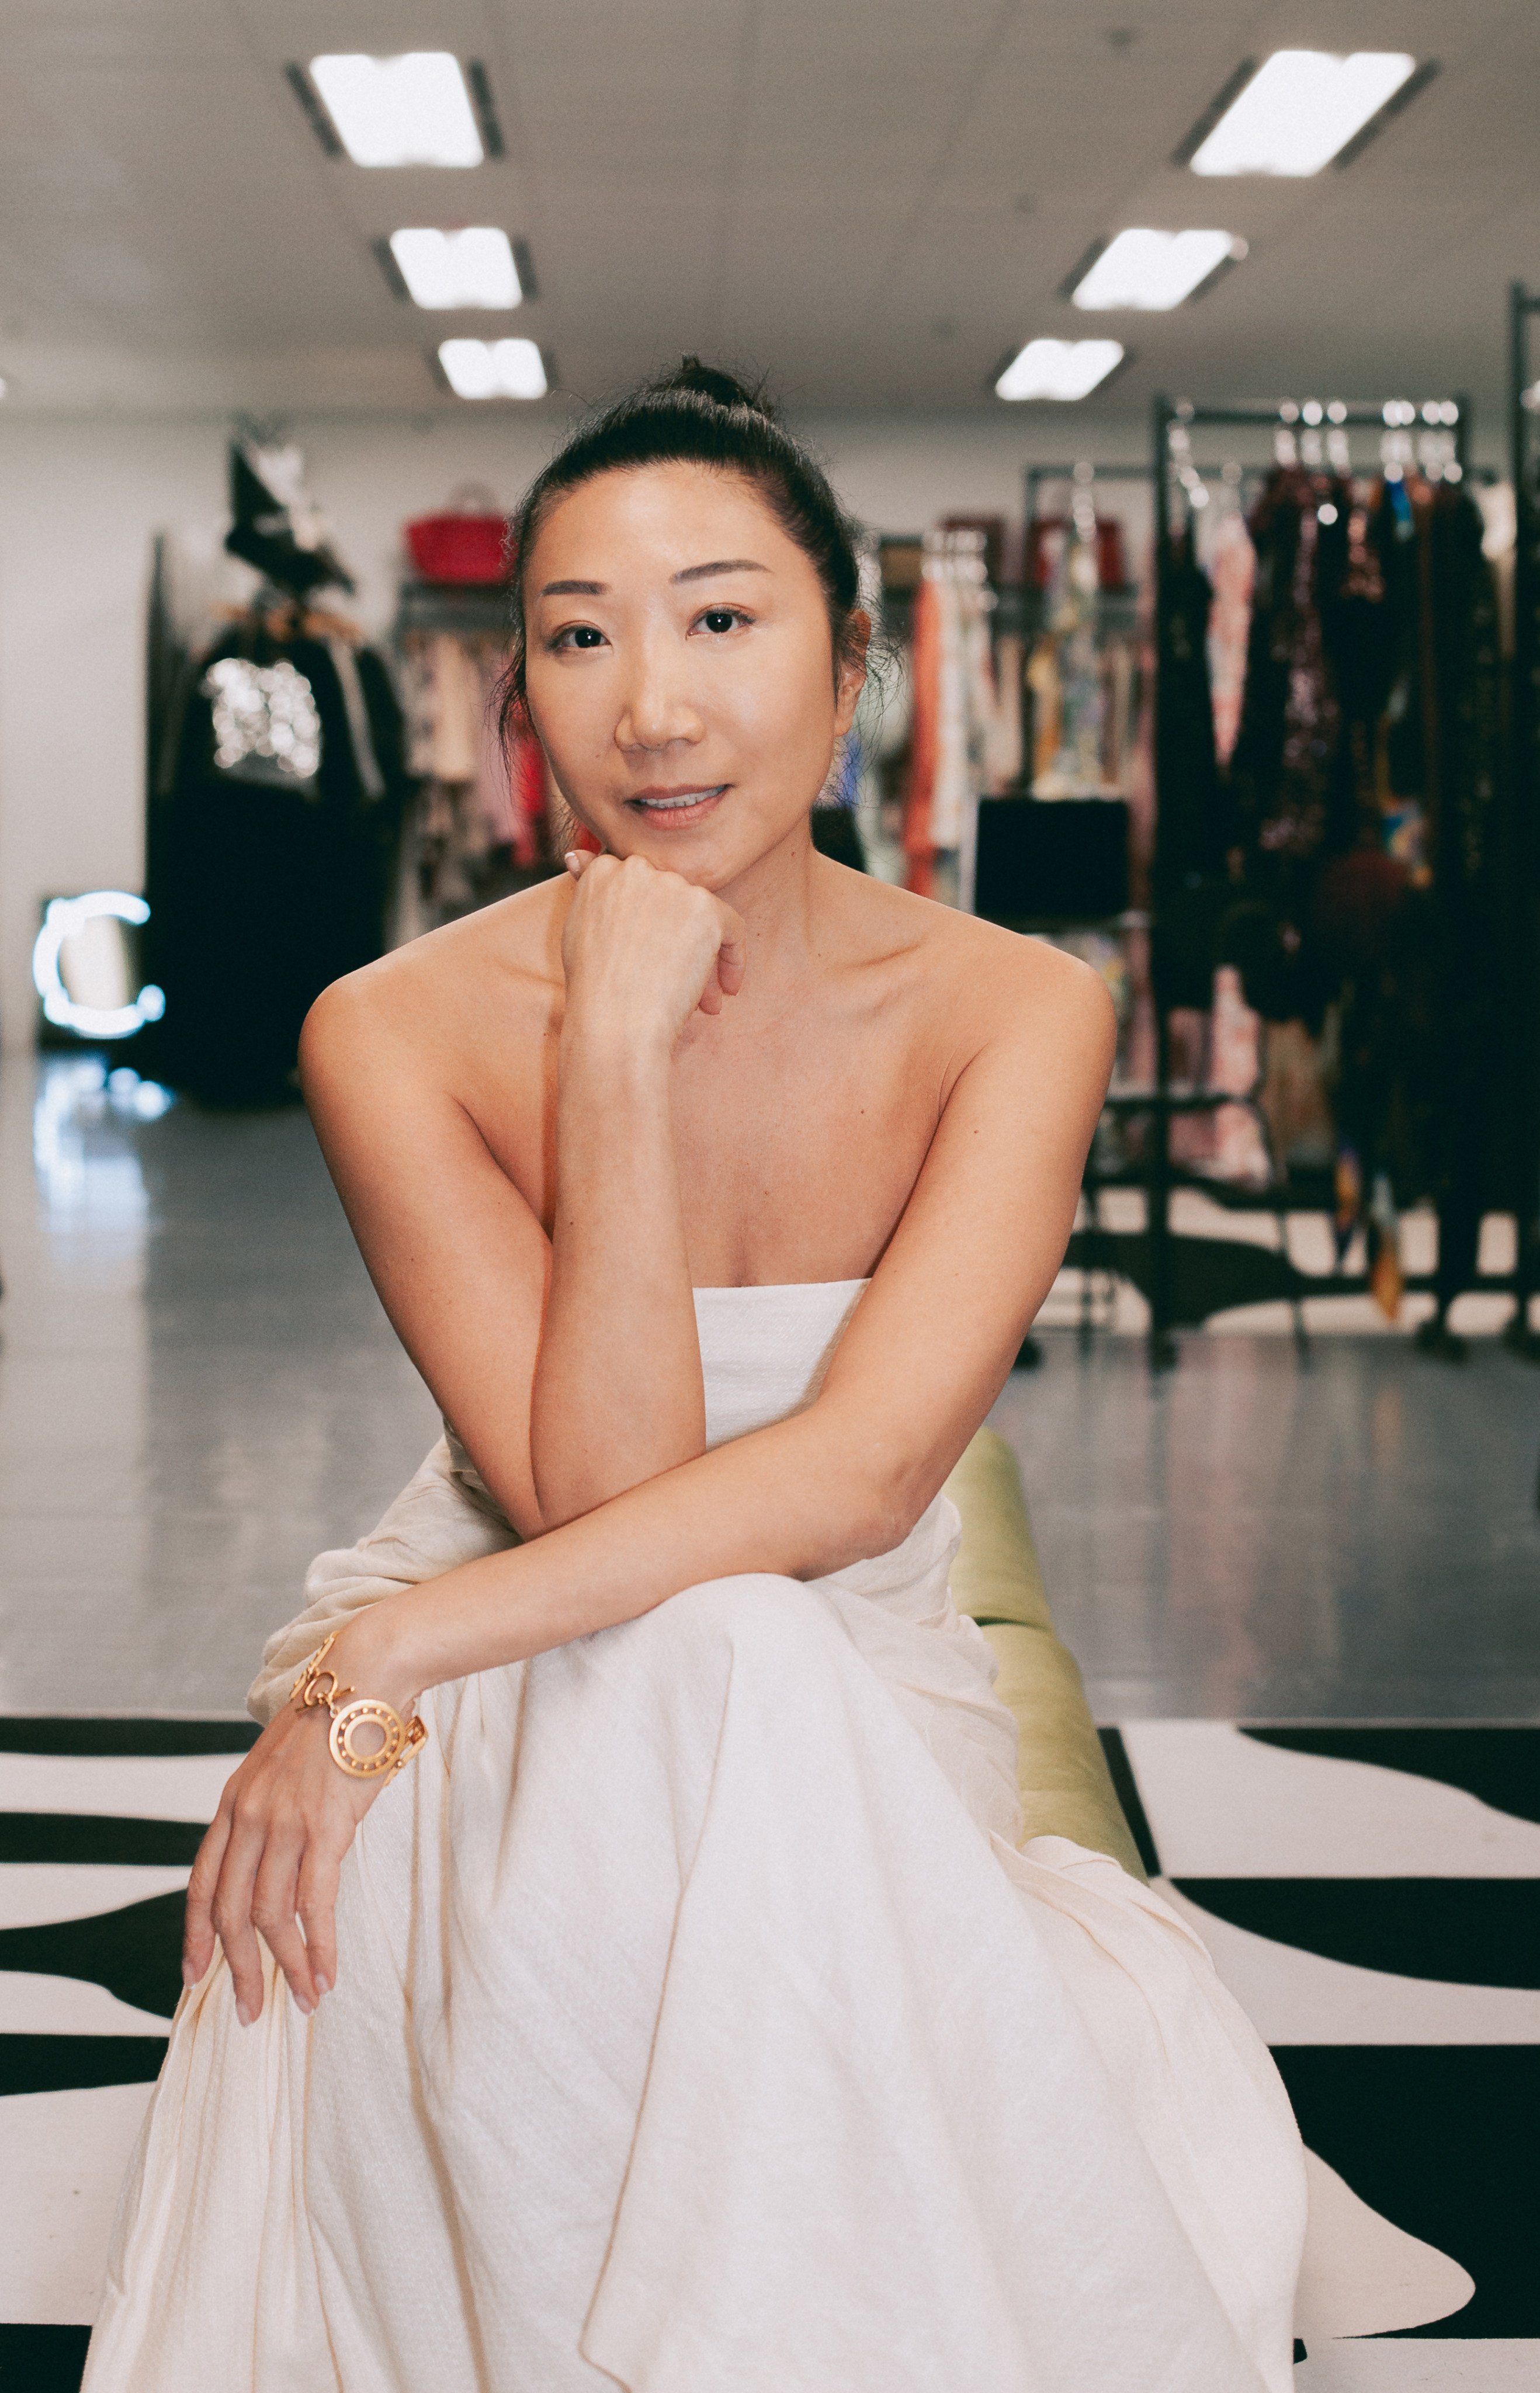 Hong Kong-based Hula founder Sarah Fung launched her preloved luxury online marketplace after becoming disenchanted with all the waste in fashion. Photo: Handout